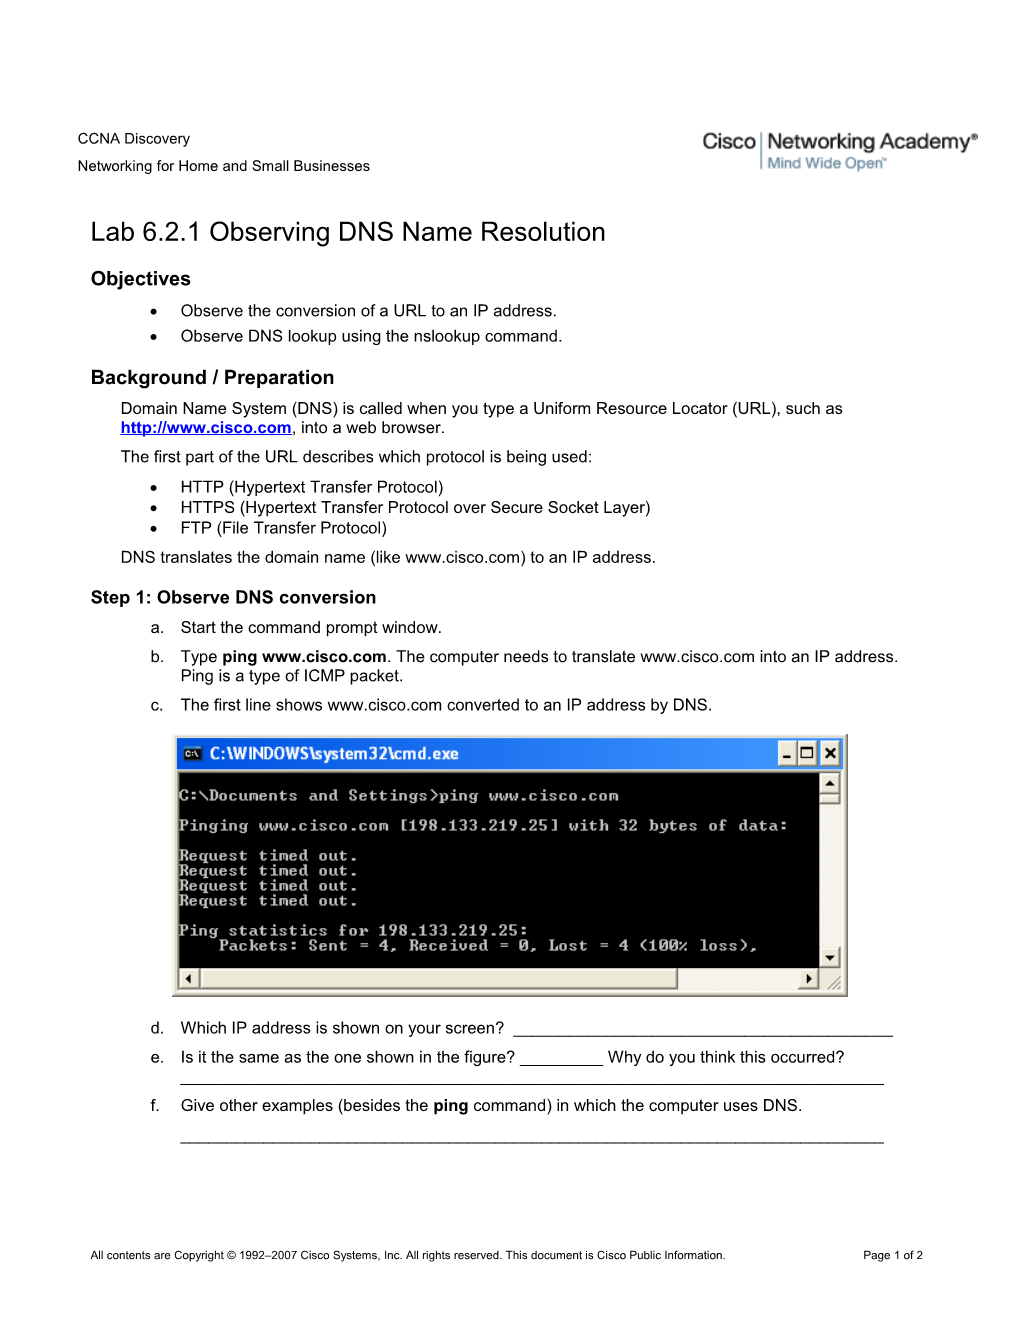 Observing DNS Name Resolution